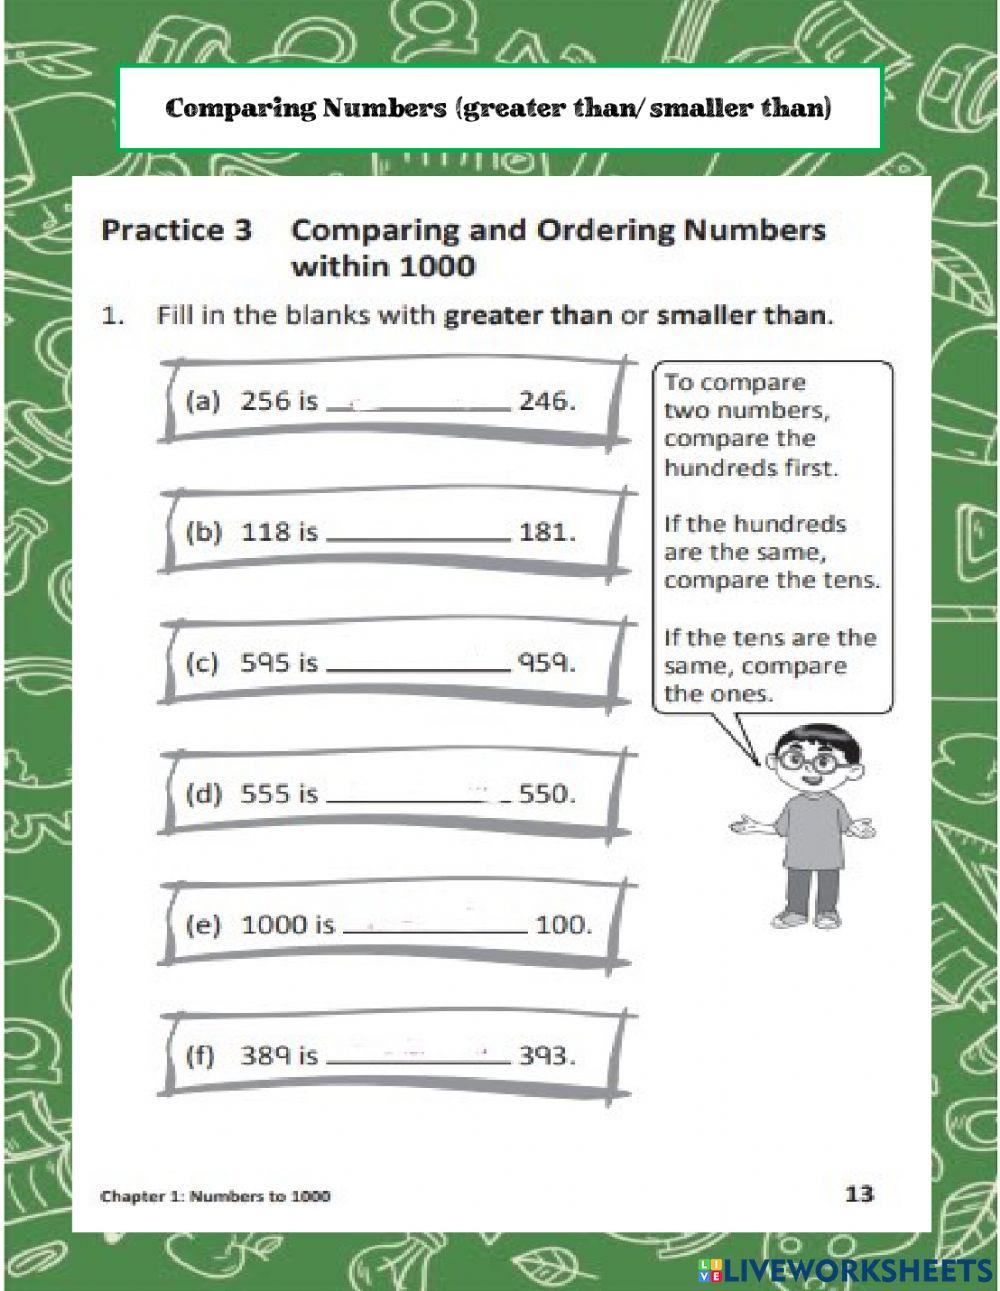 Yr2 Compare Number wb p13-14